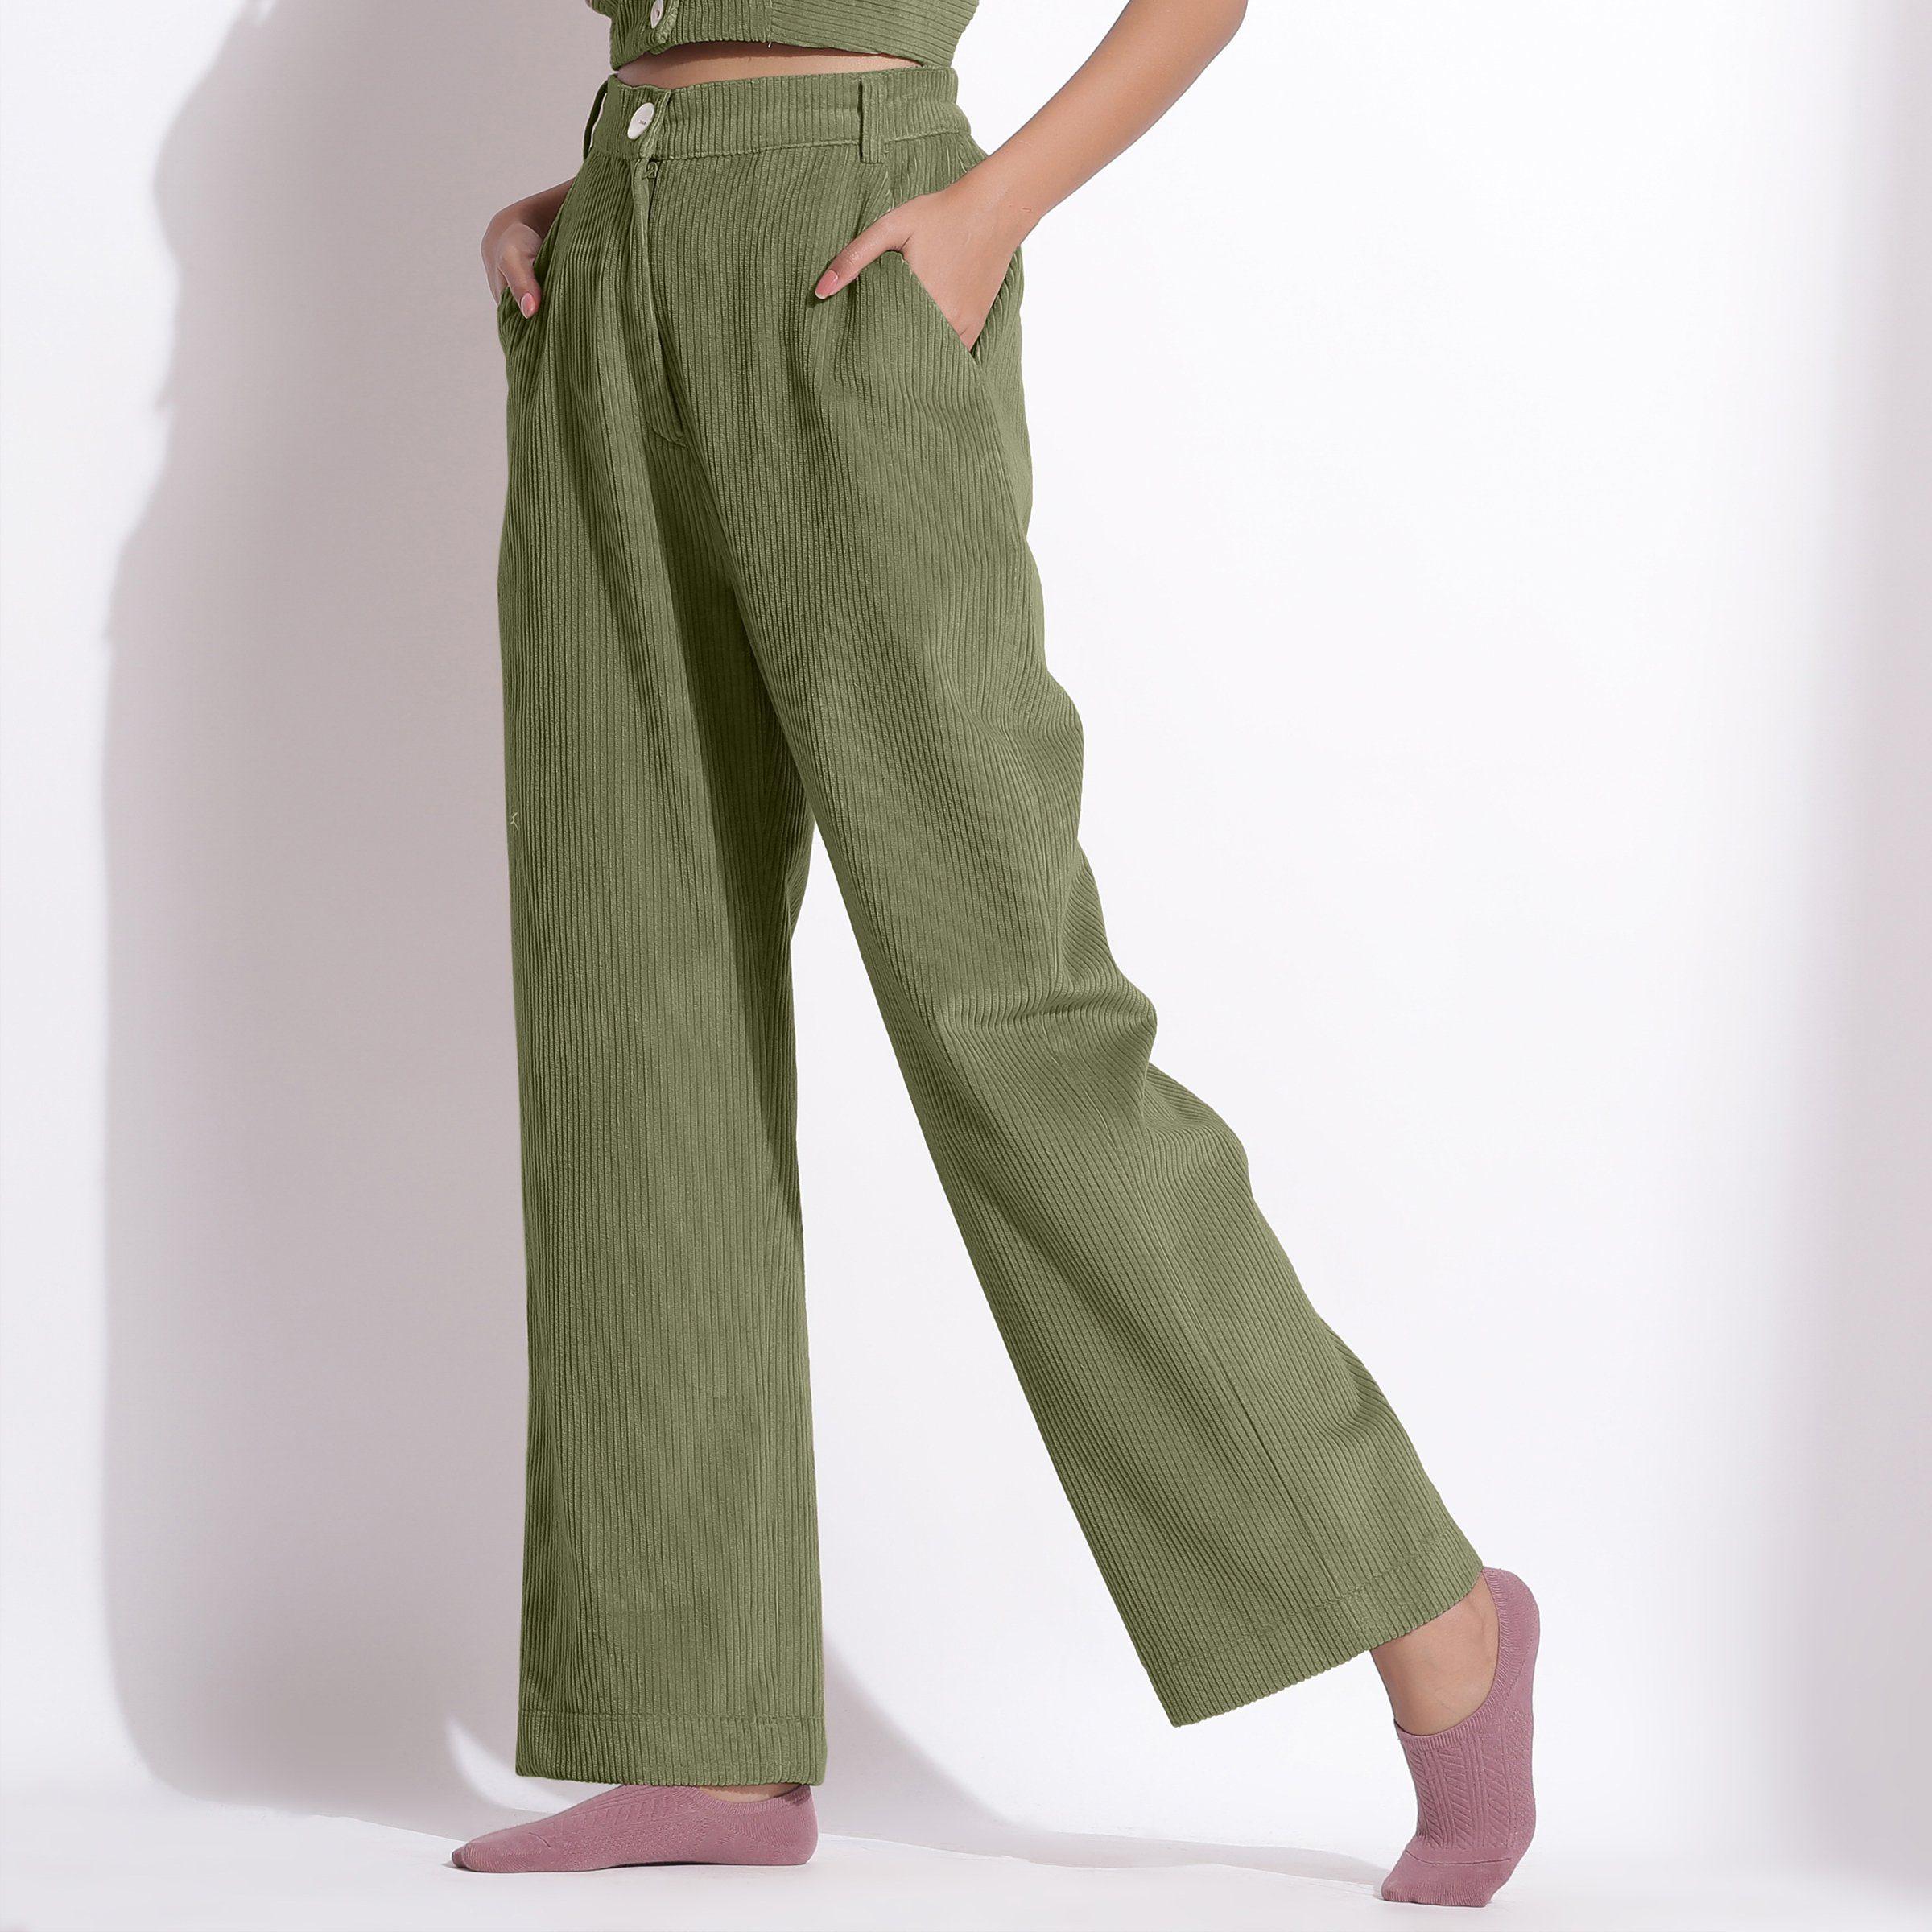 Buy Sage Green Warm Cotton Corduroy Wide Legged Trousers Online at